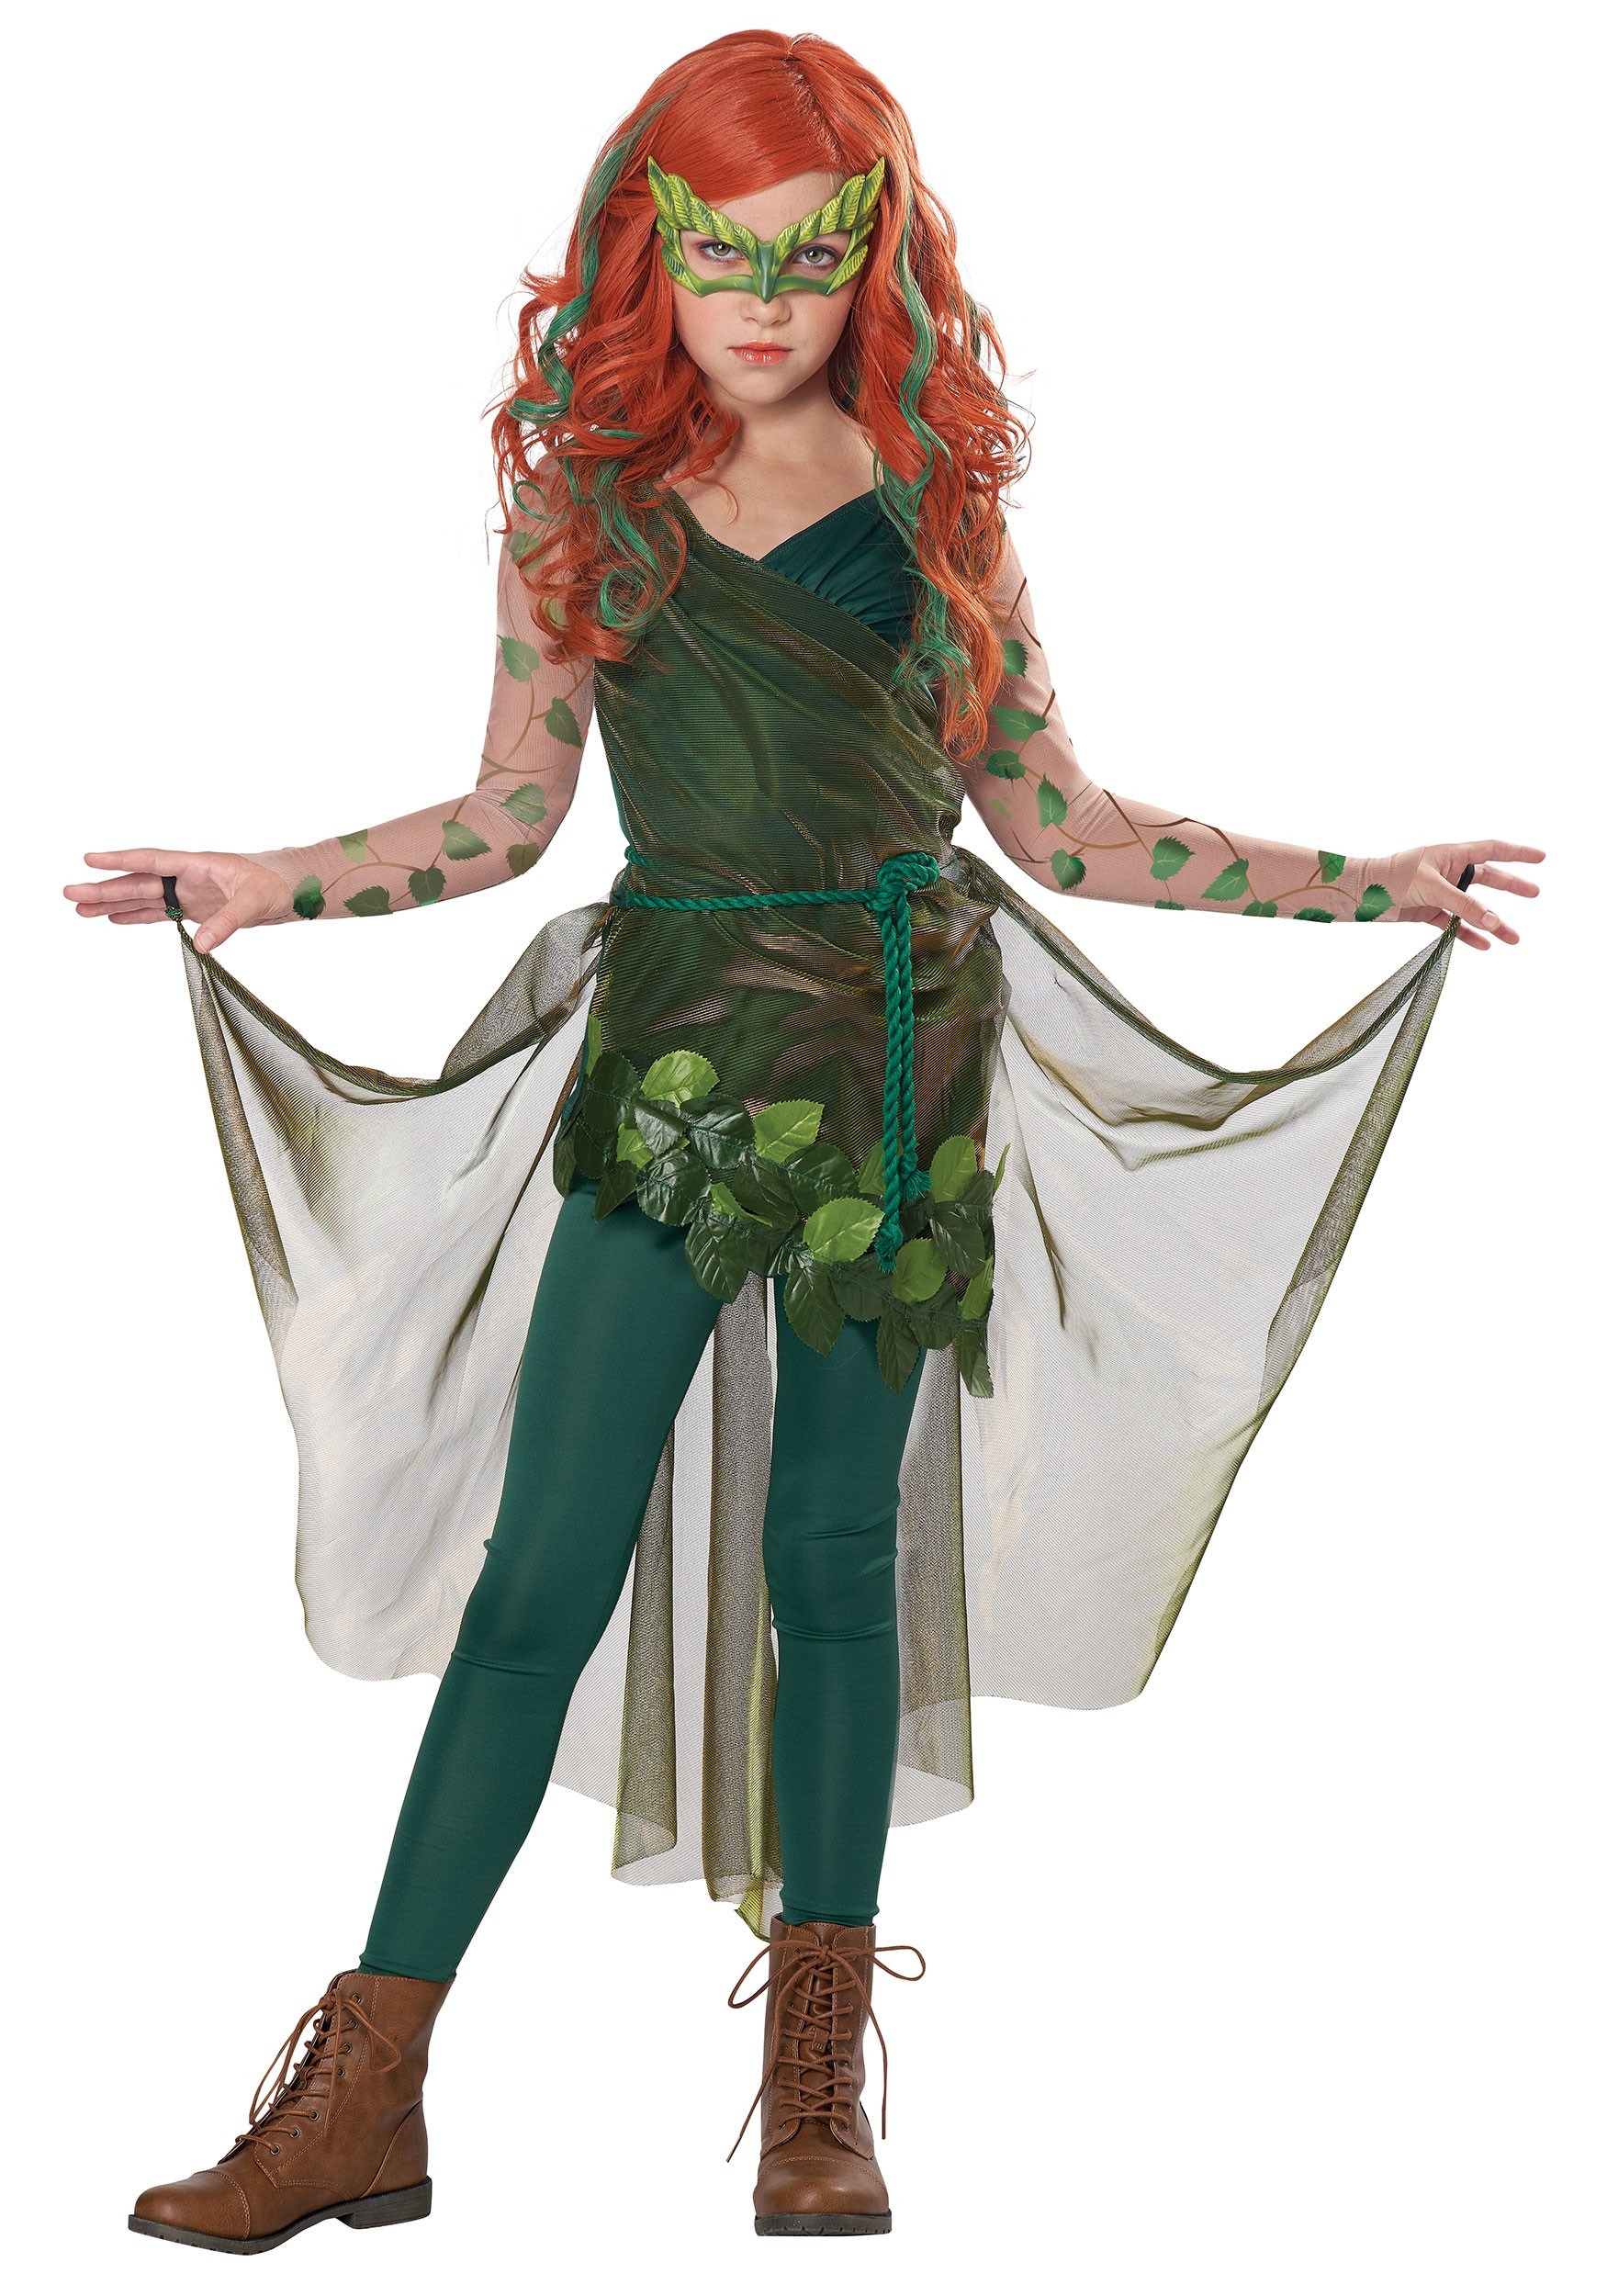 danny knotts recommends poison ivy dc superhero girl costume pic